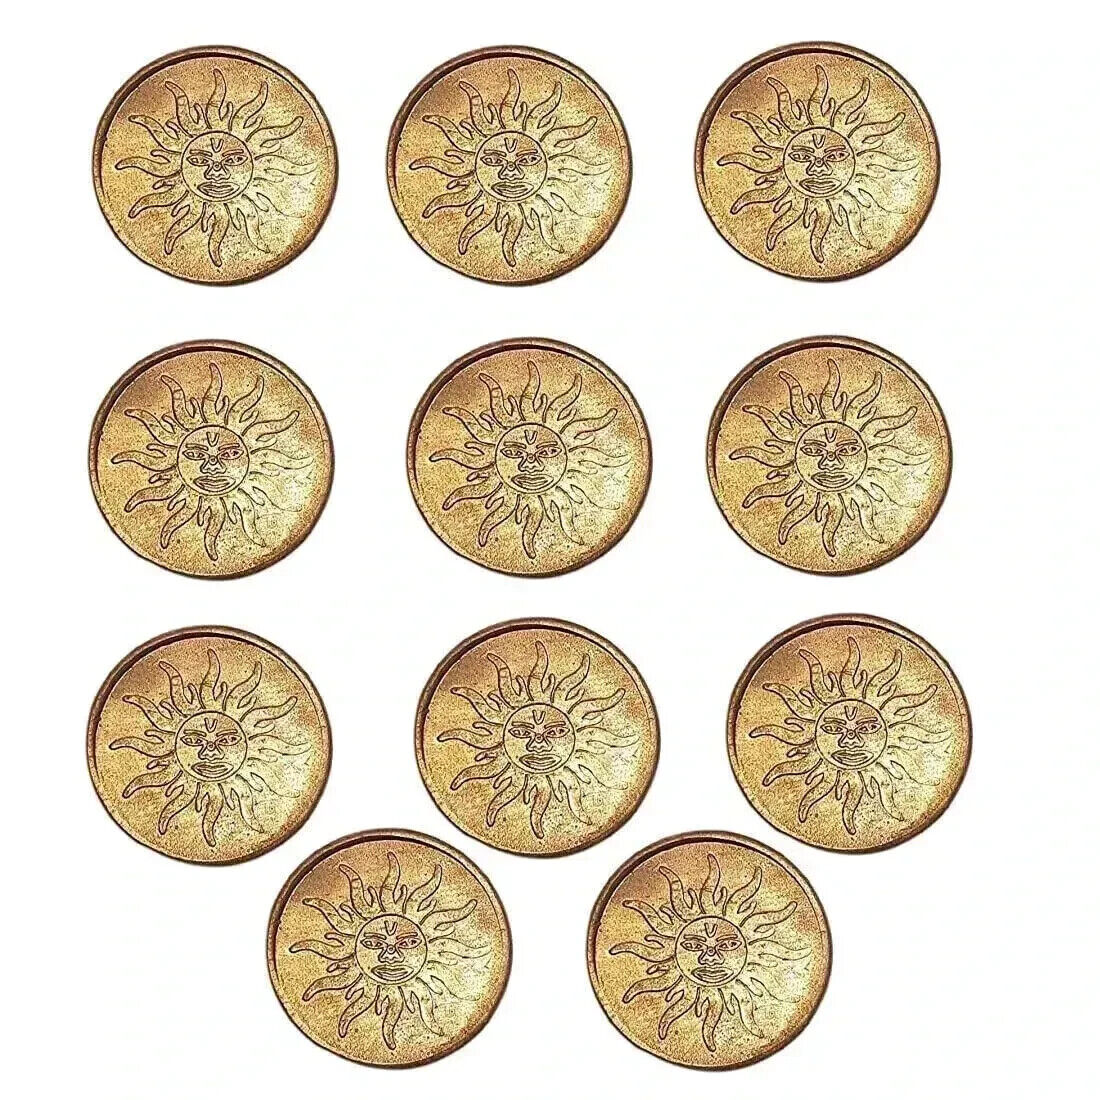 Set of 11 Pcs Sun/Surya Yantra Copper Coin/Sikka for Pooja/Astrological and Lal